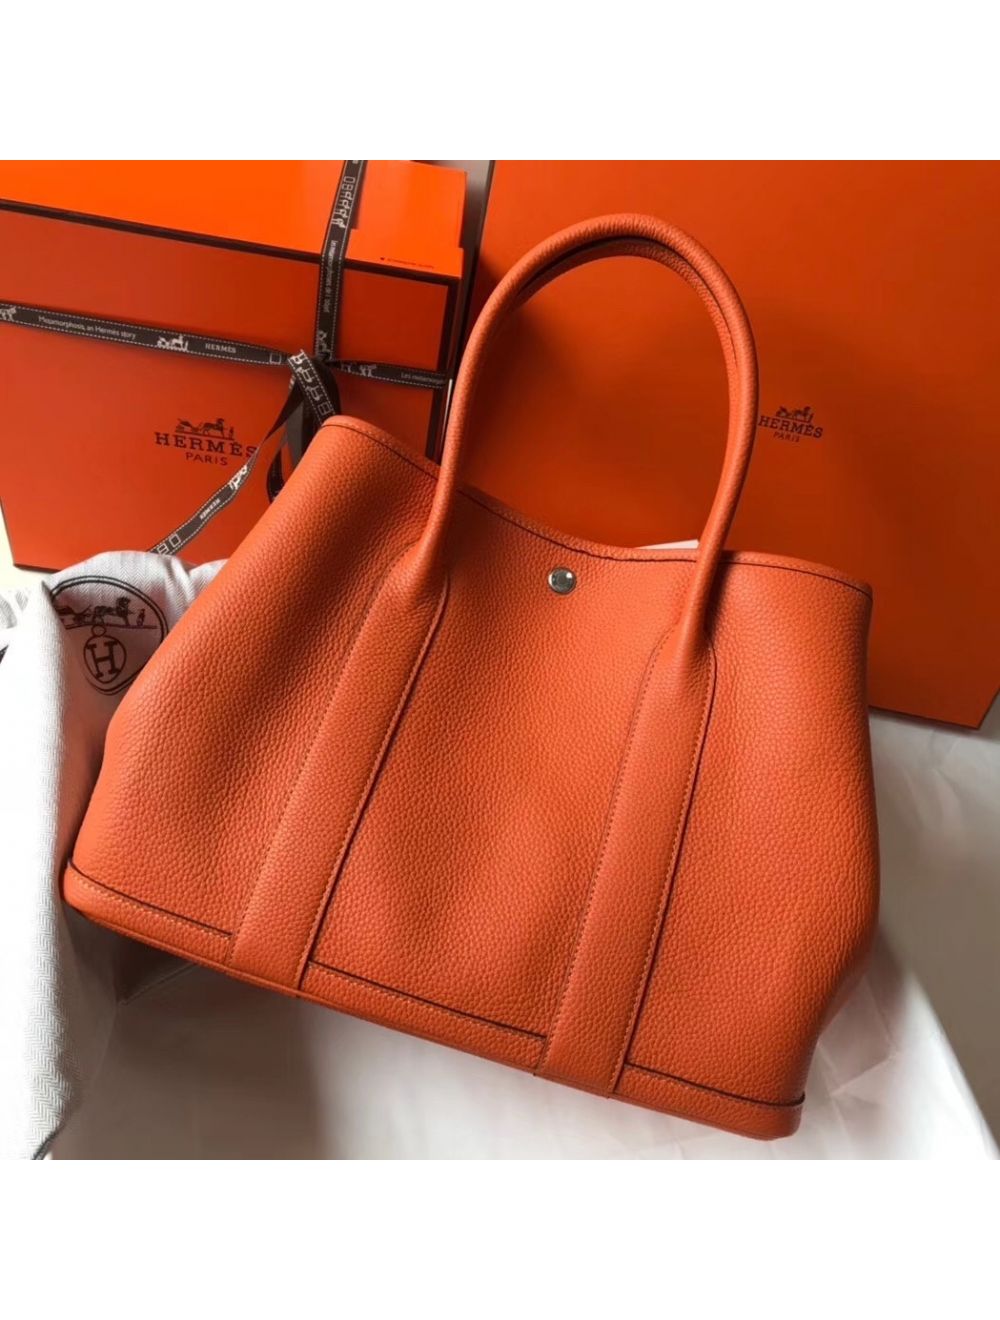 Hermes Garden Party 36 Leather Tote Bag